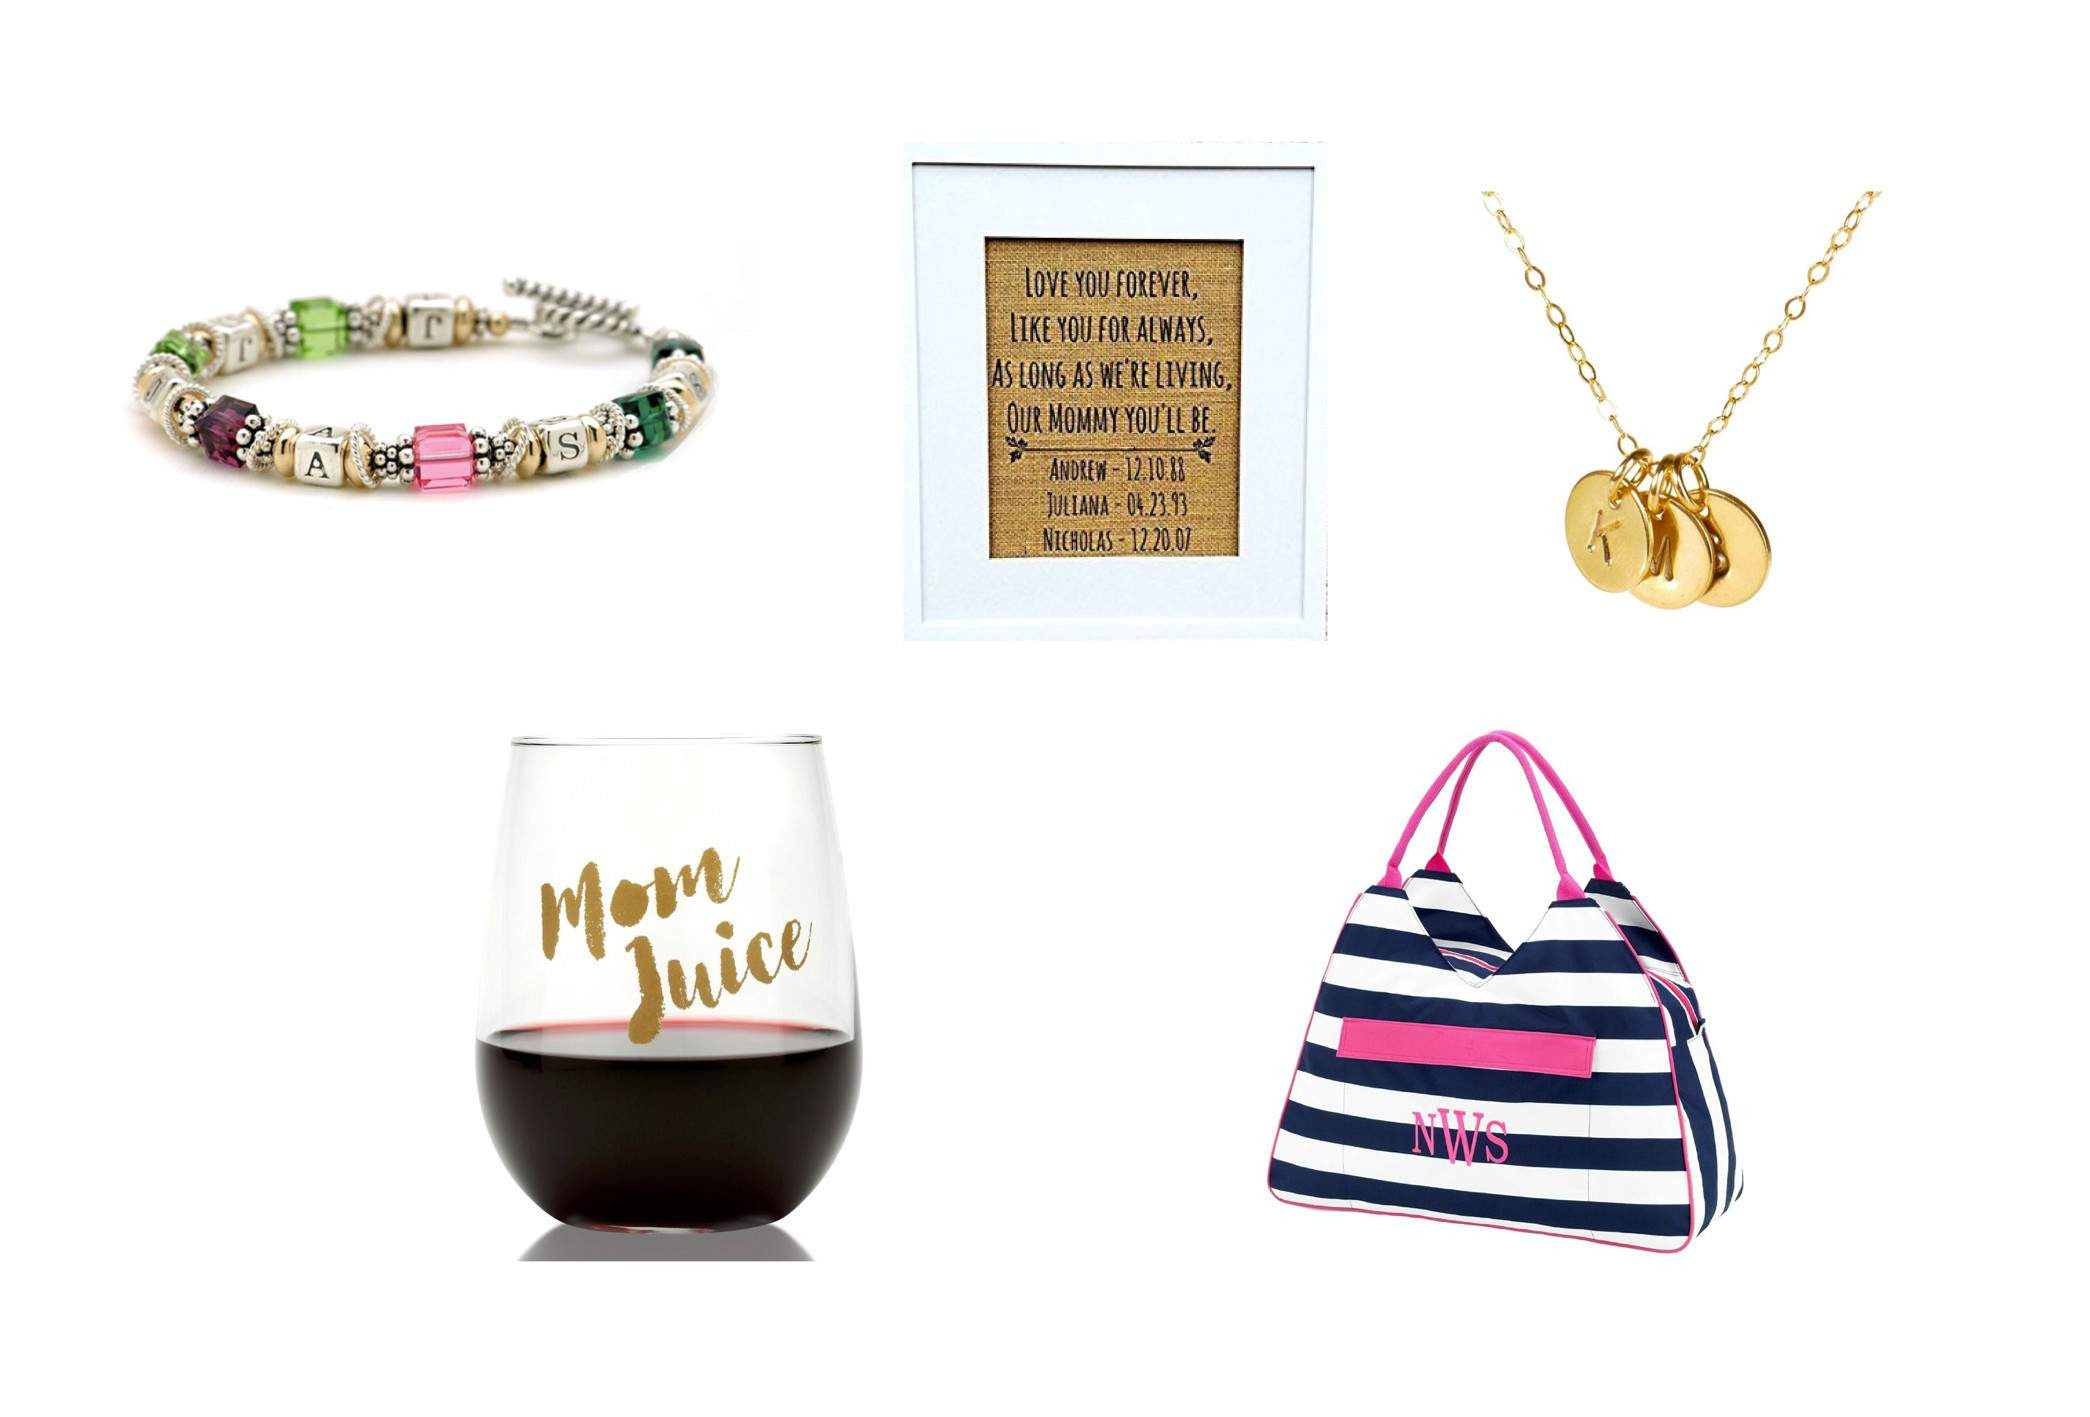 Personalized Mother's Day Gifts
 Top 10 Best Personalized Mother’s Day Gifts for New Moms